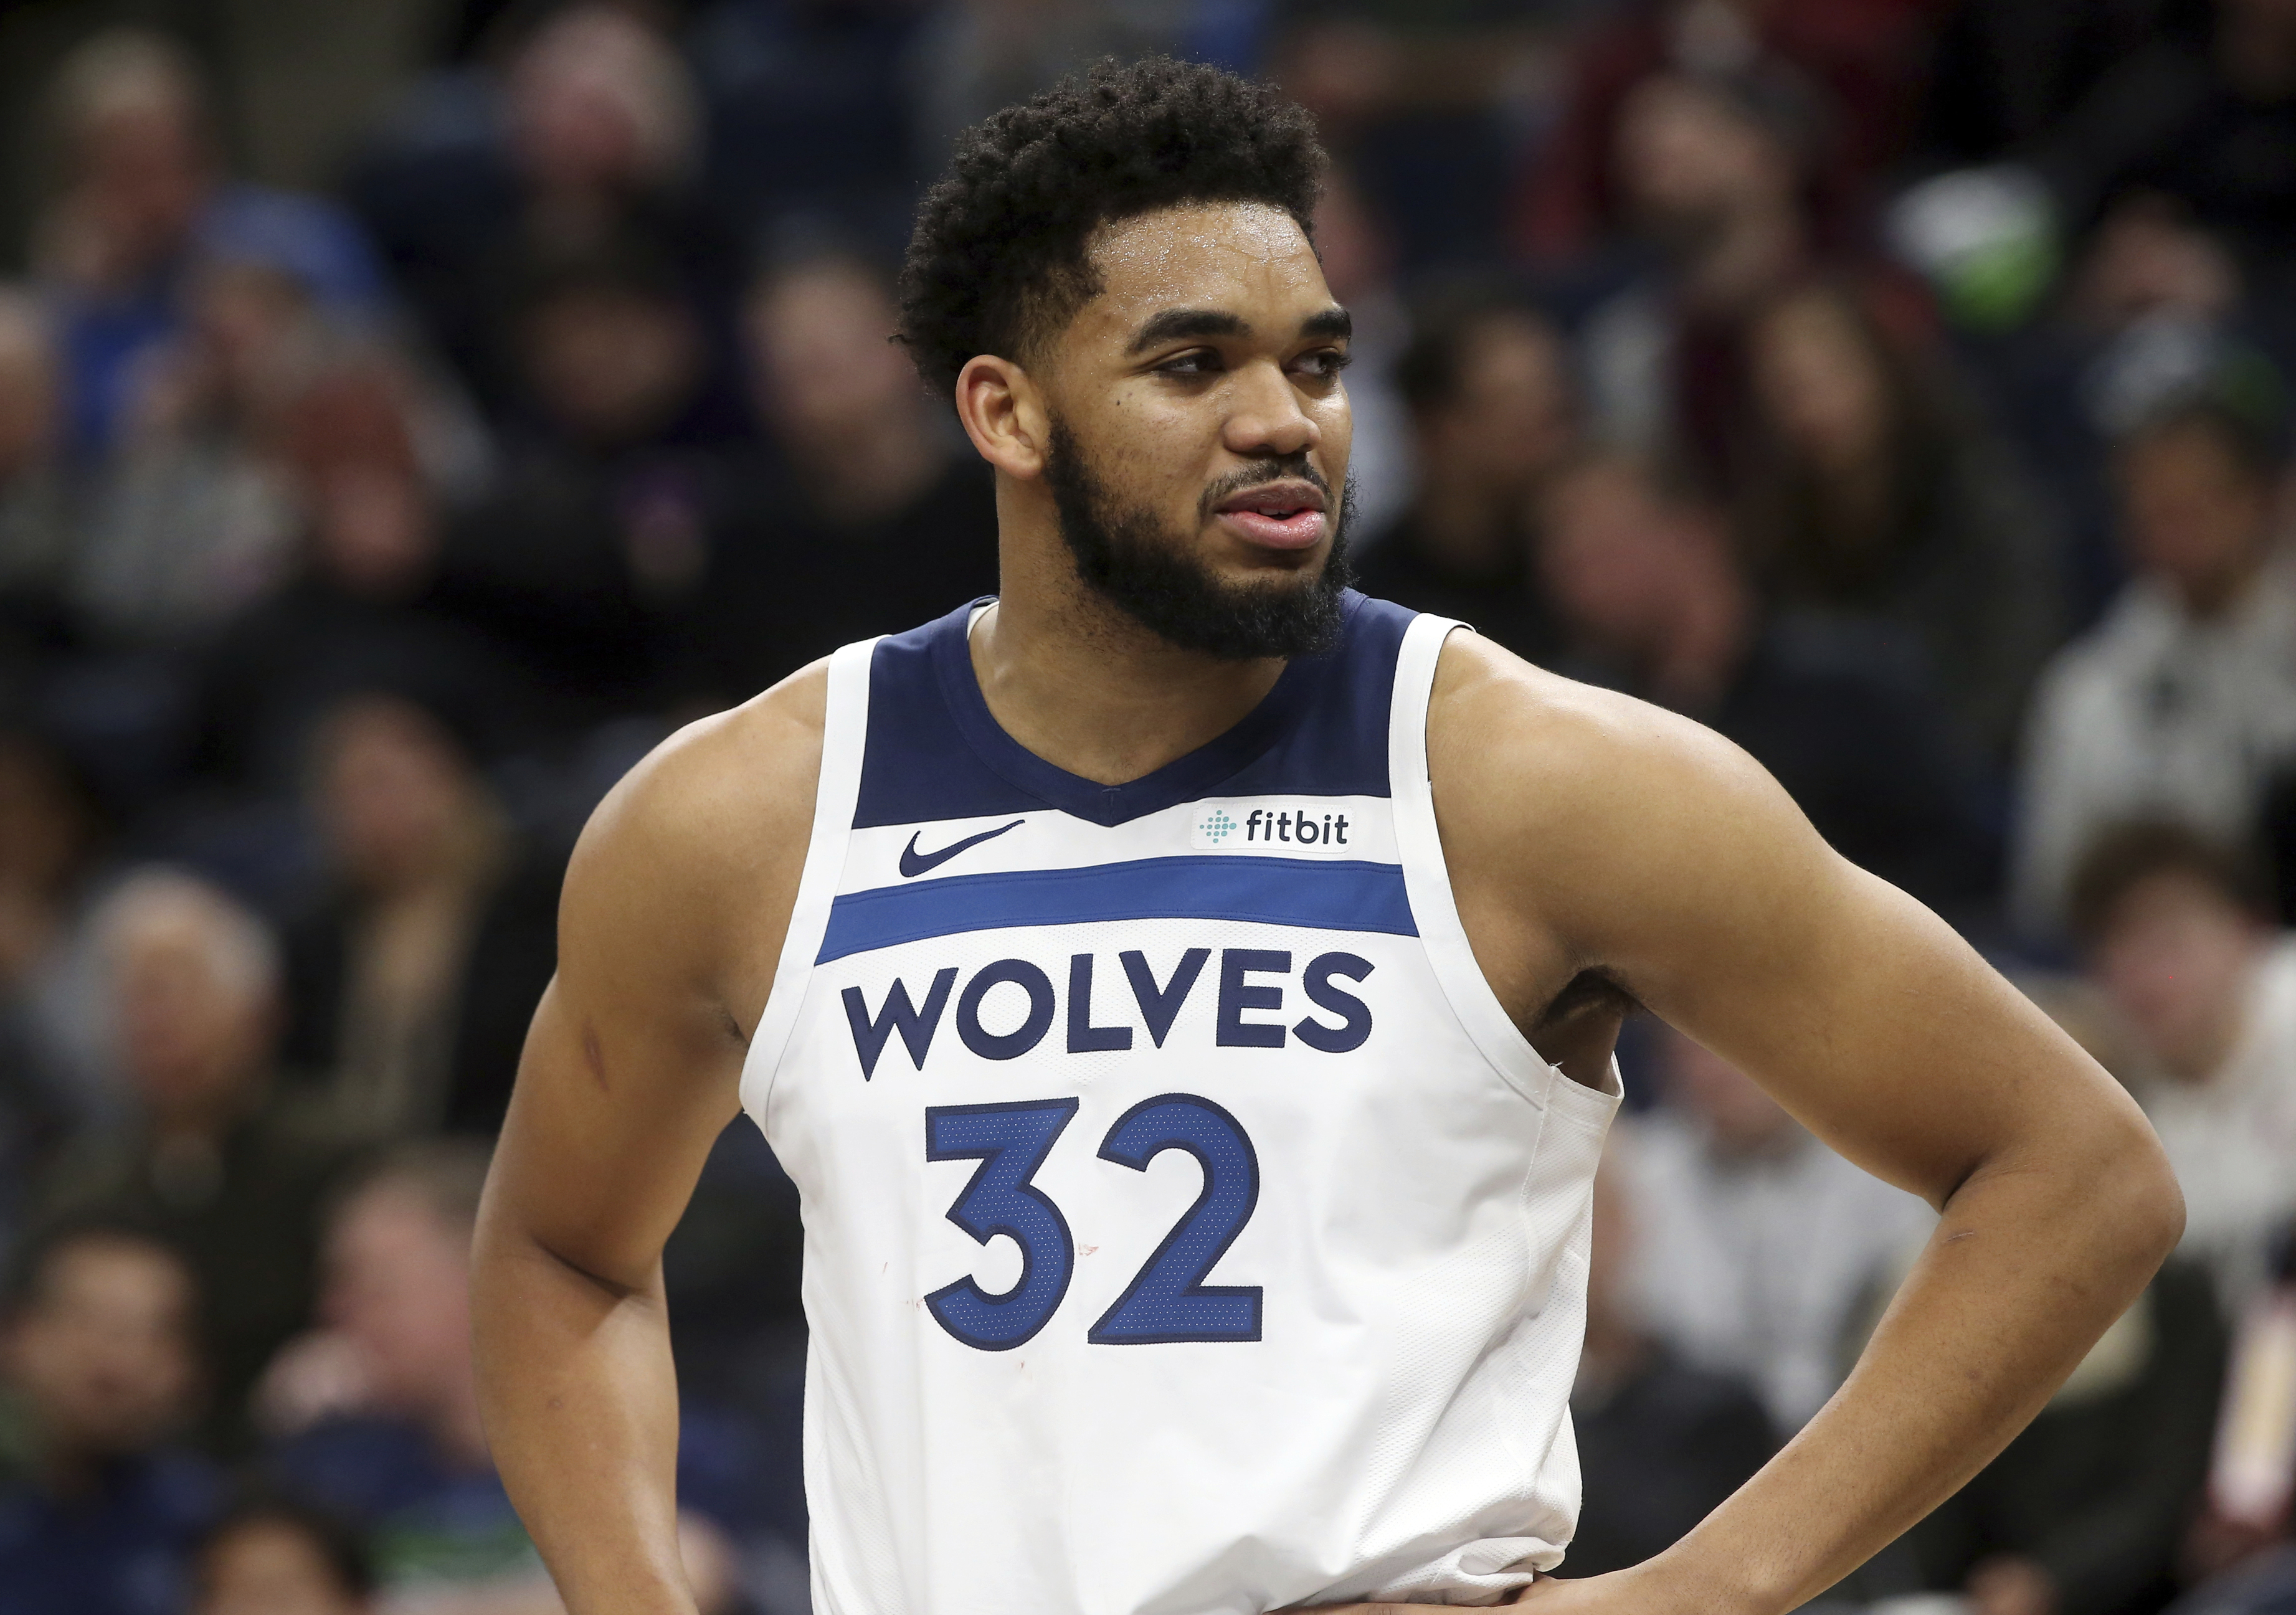 Towns returns to Wolves lineup after harrowing highway crash